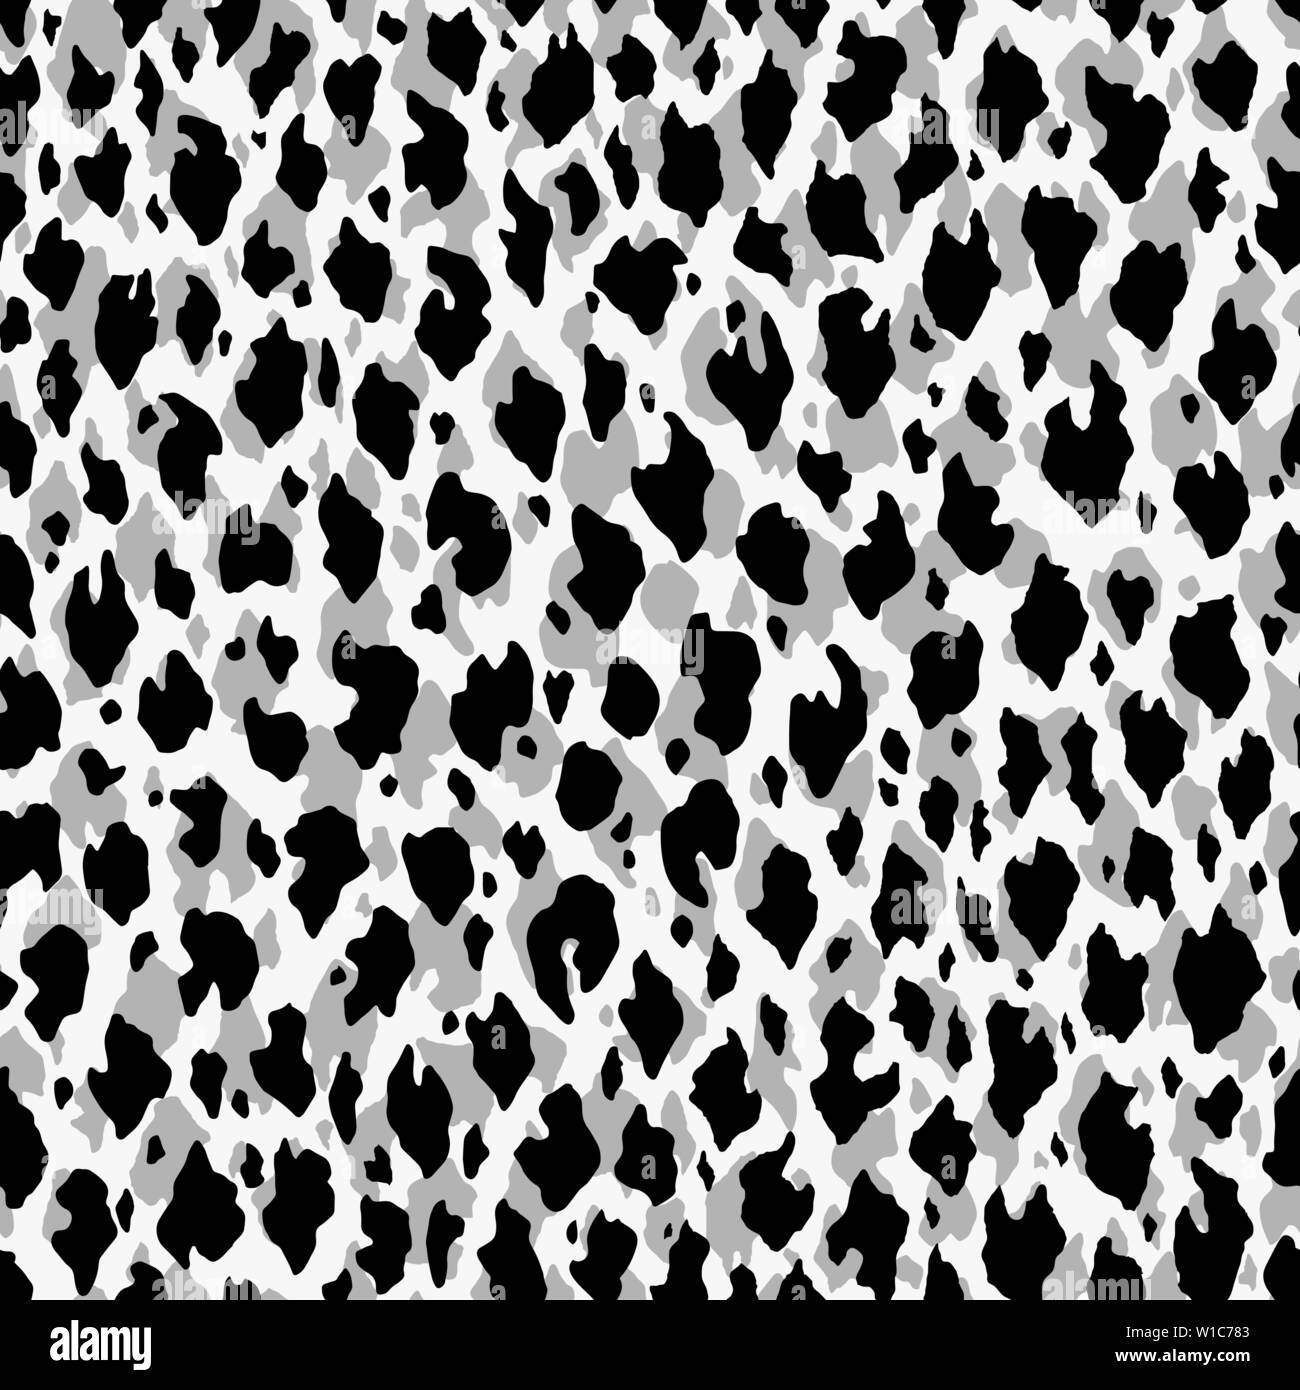 Leopard skin seamless pattern design. Vector illustration background. For print, textile, web, home decor, fashion, surface, graphic design Stock Vector